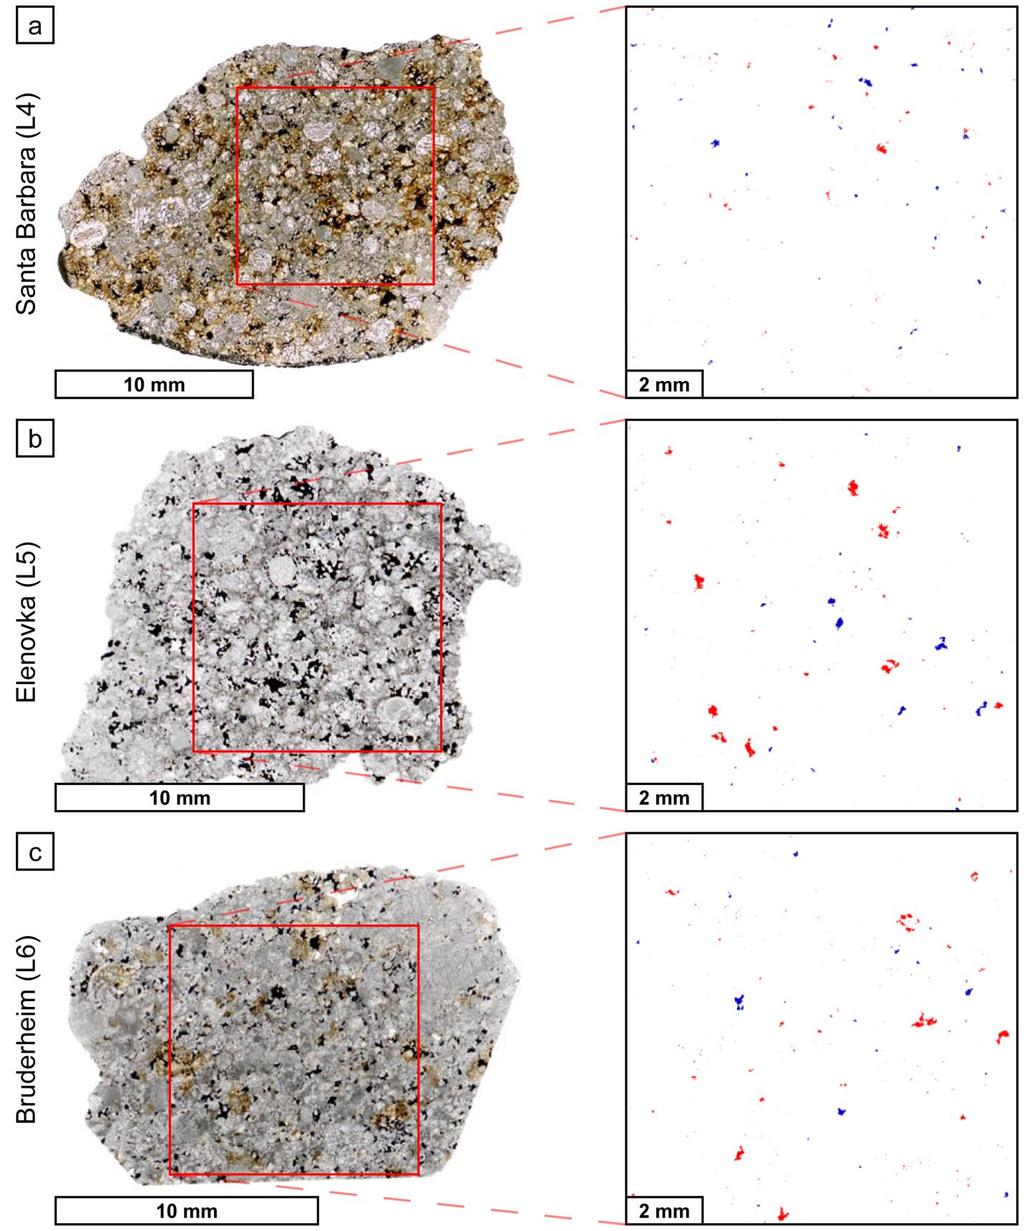 Page of 0 0 0 0 0 0 Fig.. Thin sections of samples studied: images on the left are flat-bed optical scans of (a) Santa Barbara (L), (b) Elenovka (L), (c) Bruderheim (L).